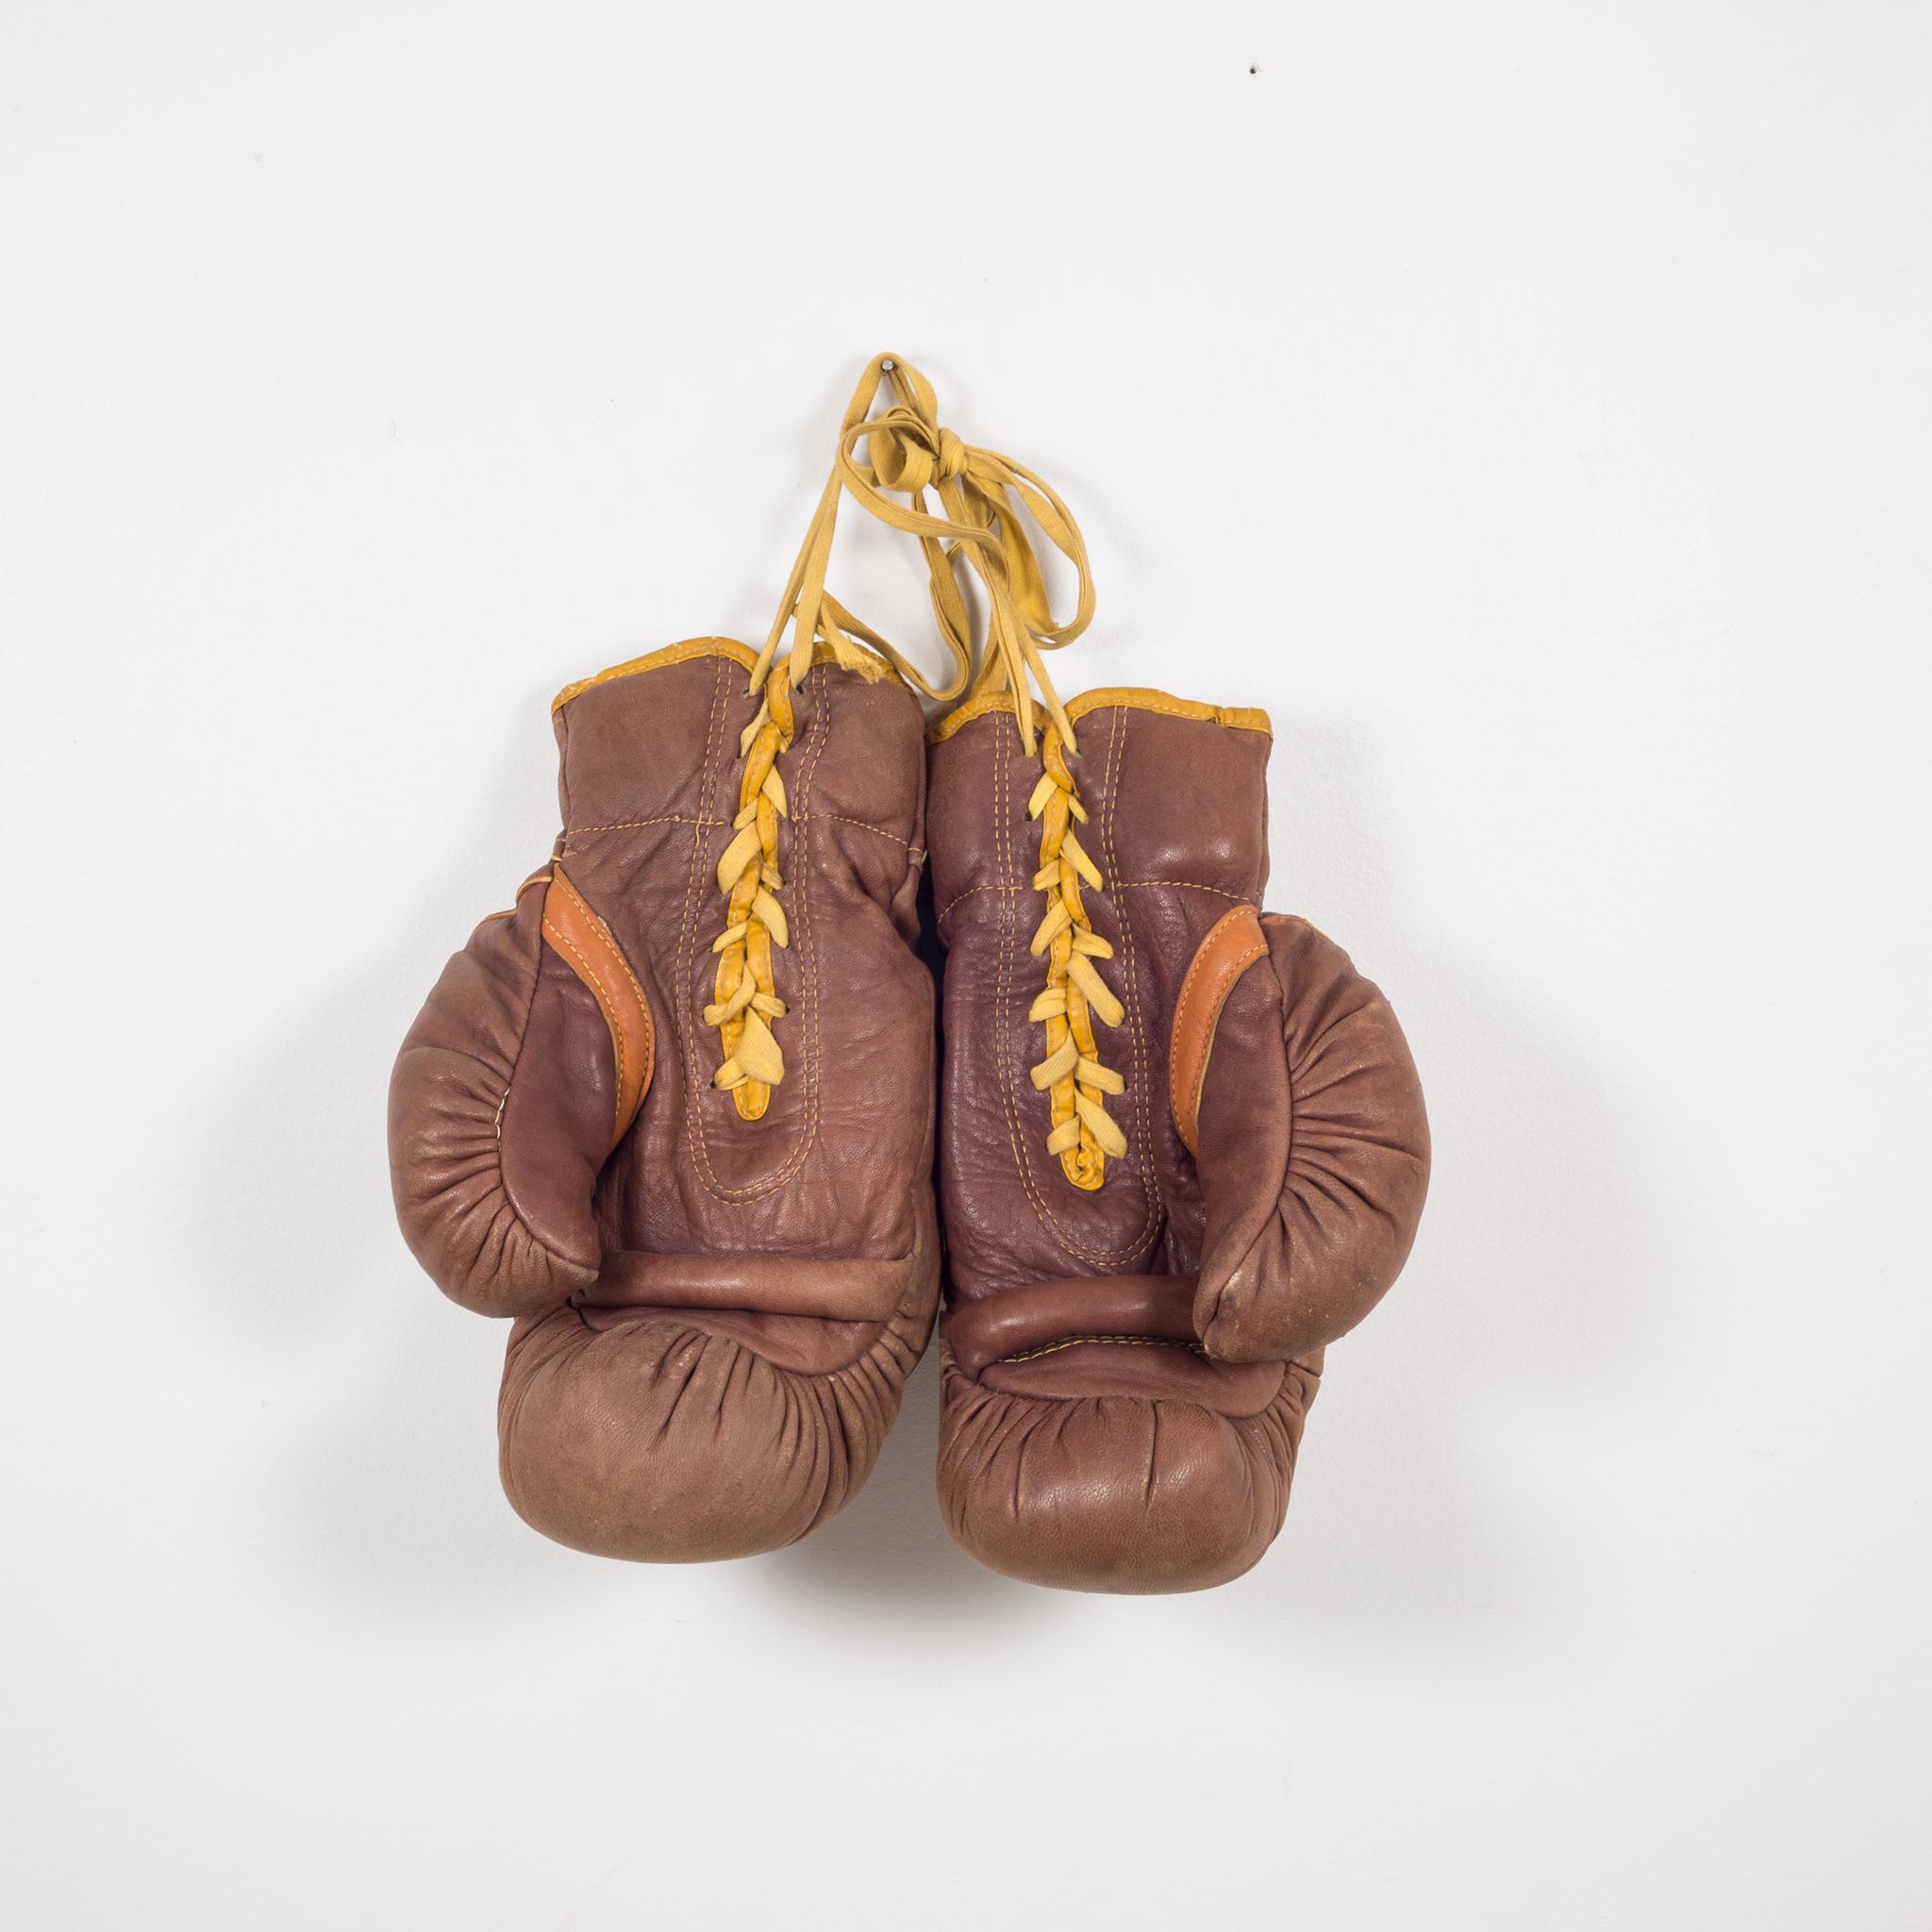 About

This is a original pair of vintage leather boxing gloves with brown and tobacco leather and gold piping and laces. Very thick gloves with manufacturers label on each glove.

 Creator: Ken Wel Sporting Goods Company, American 1919-1960.
